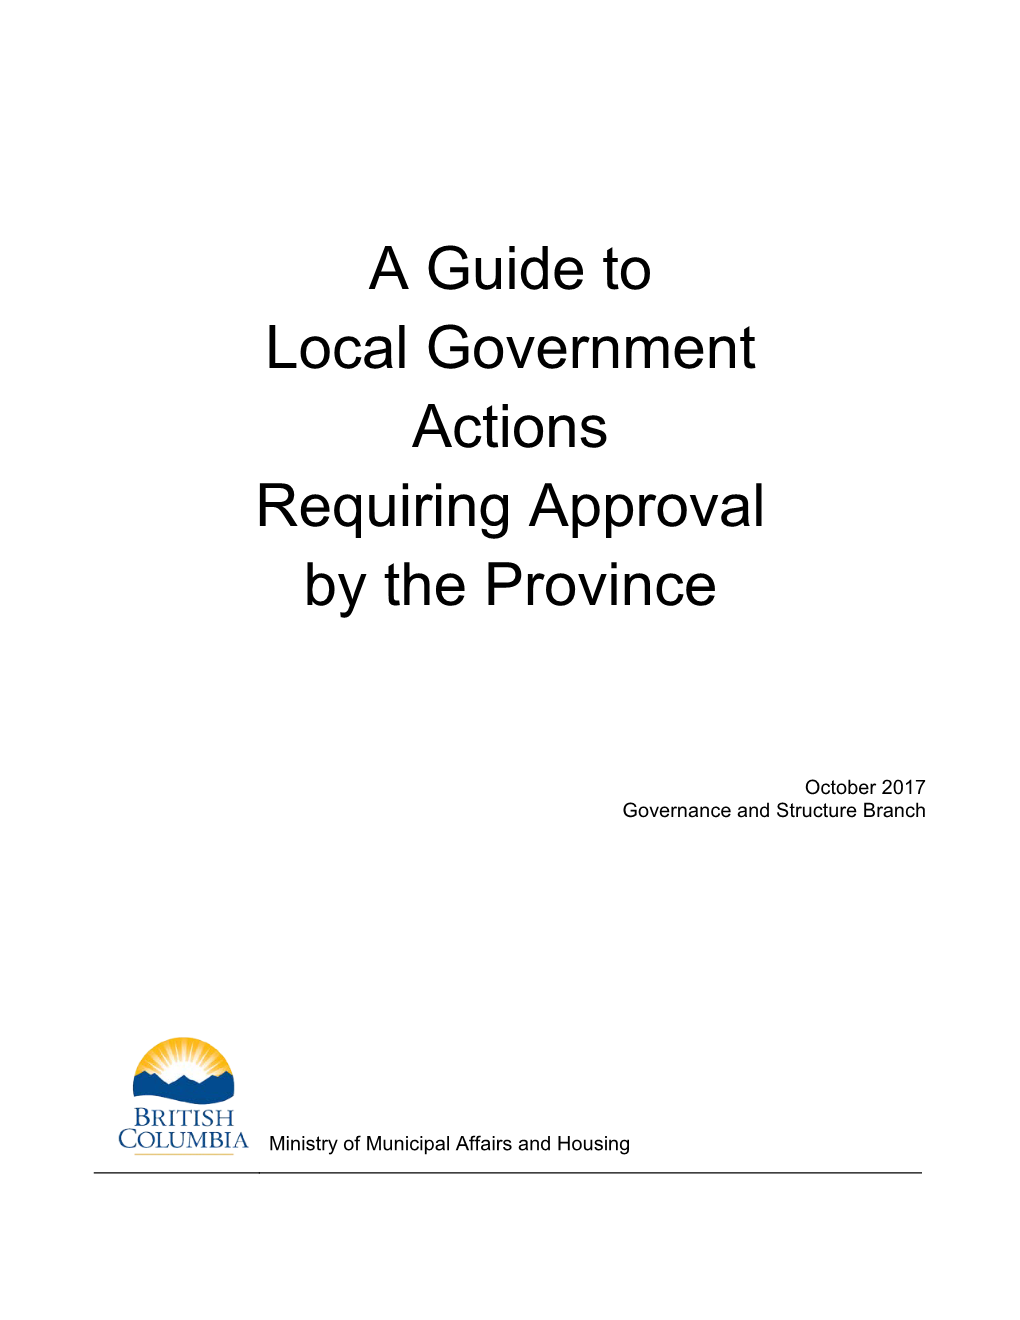 A Guide to Local Government Actions Requiring Approval by the Province